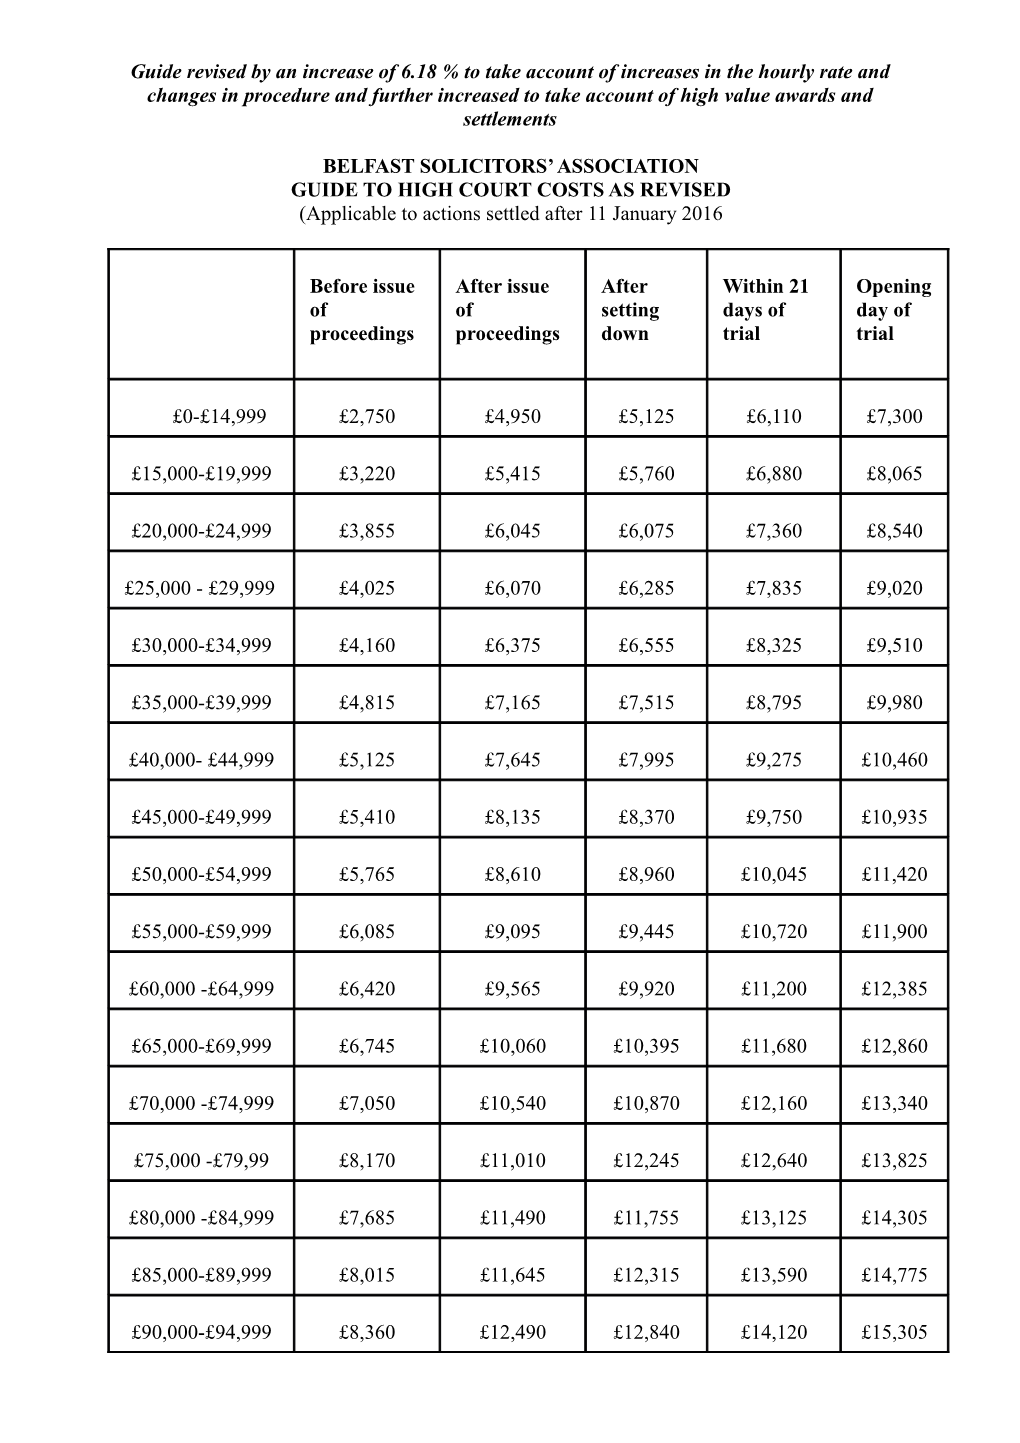 Guide to High Court Costs As Revised